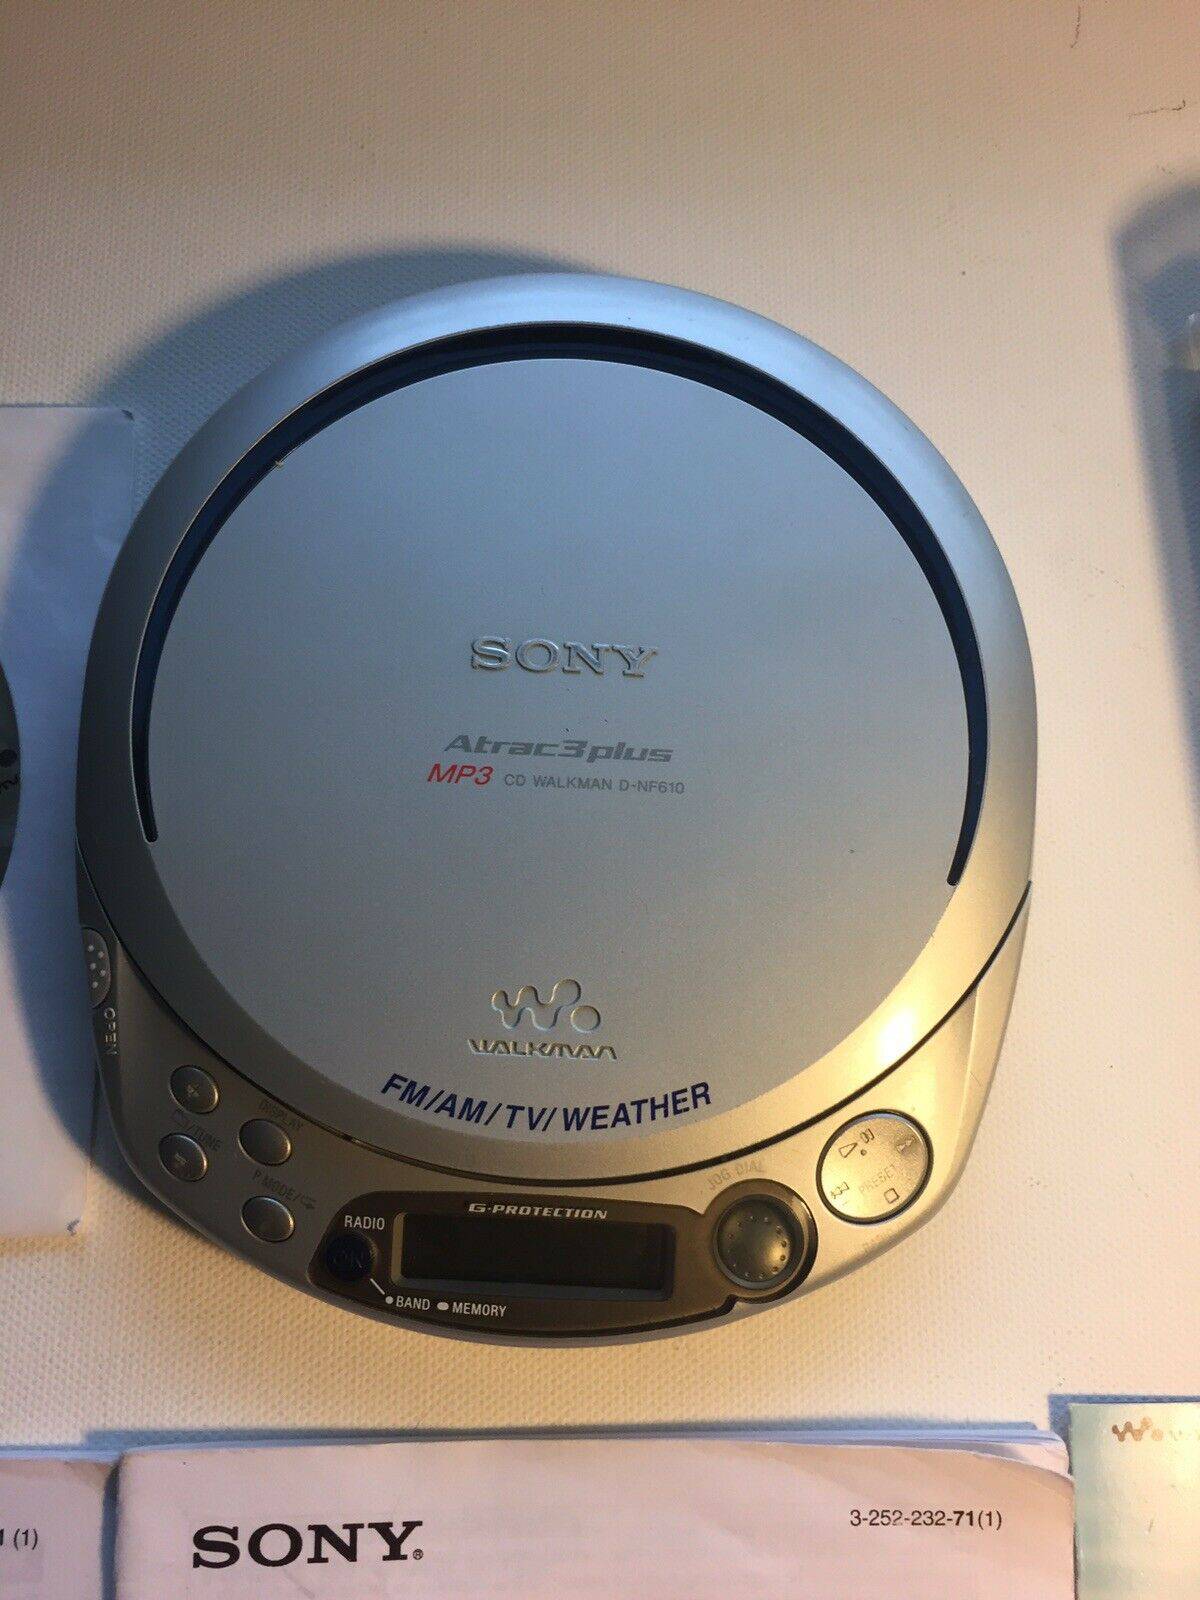 Sony D-NF610